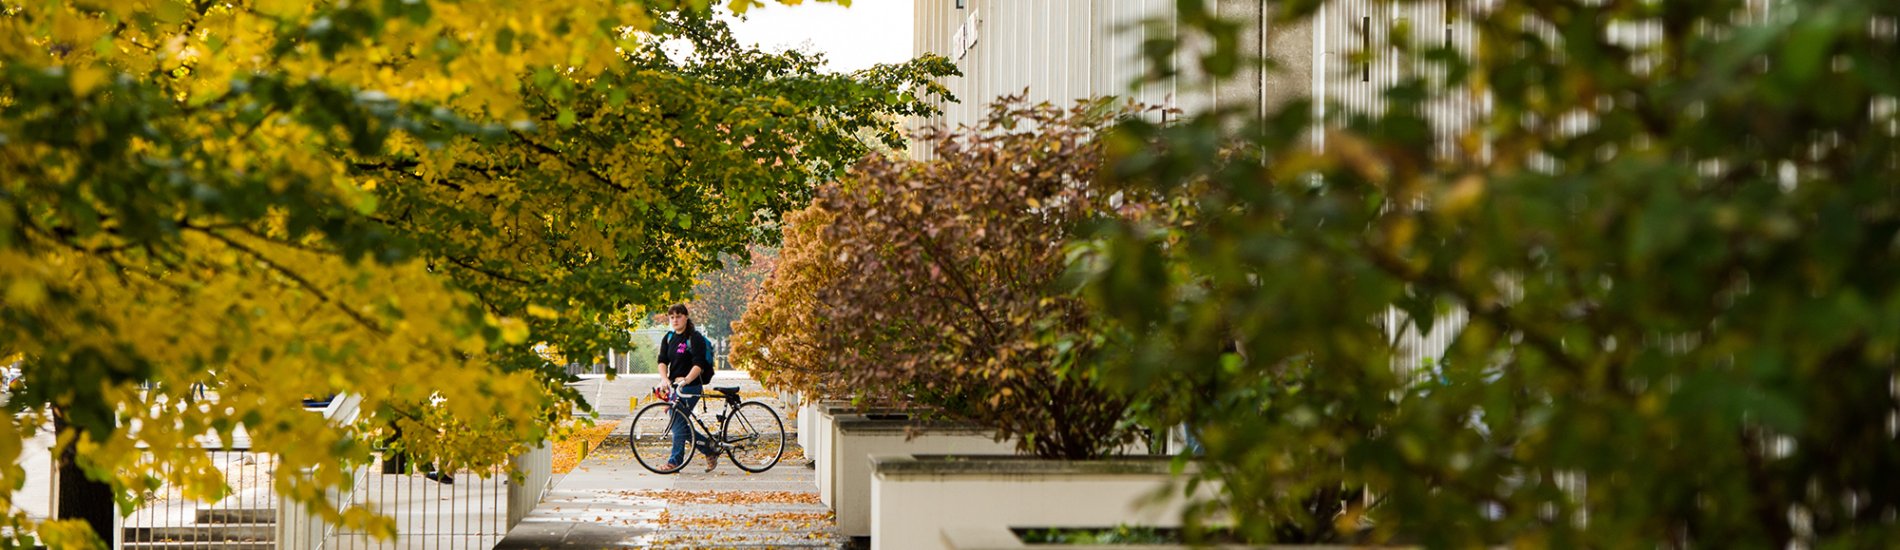 A student walking their bicycle across the academic Podium on campus.